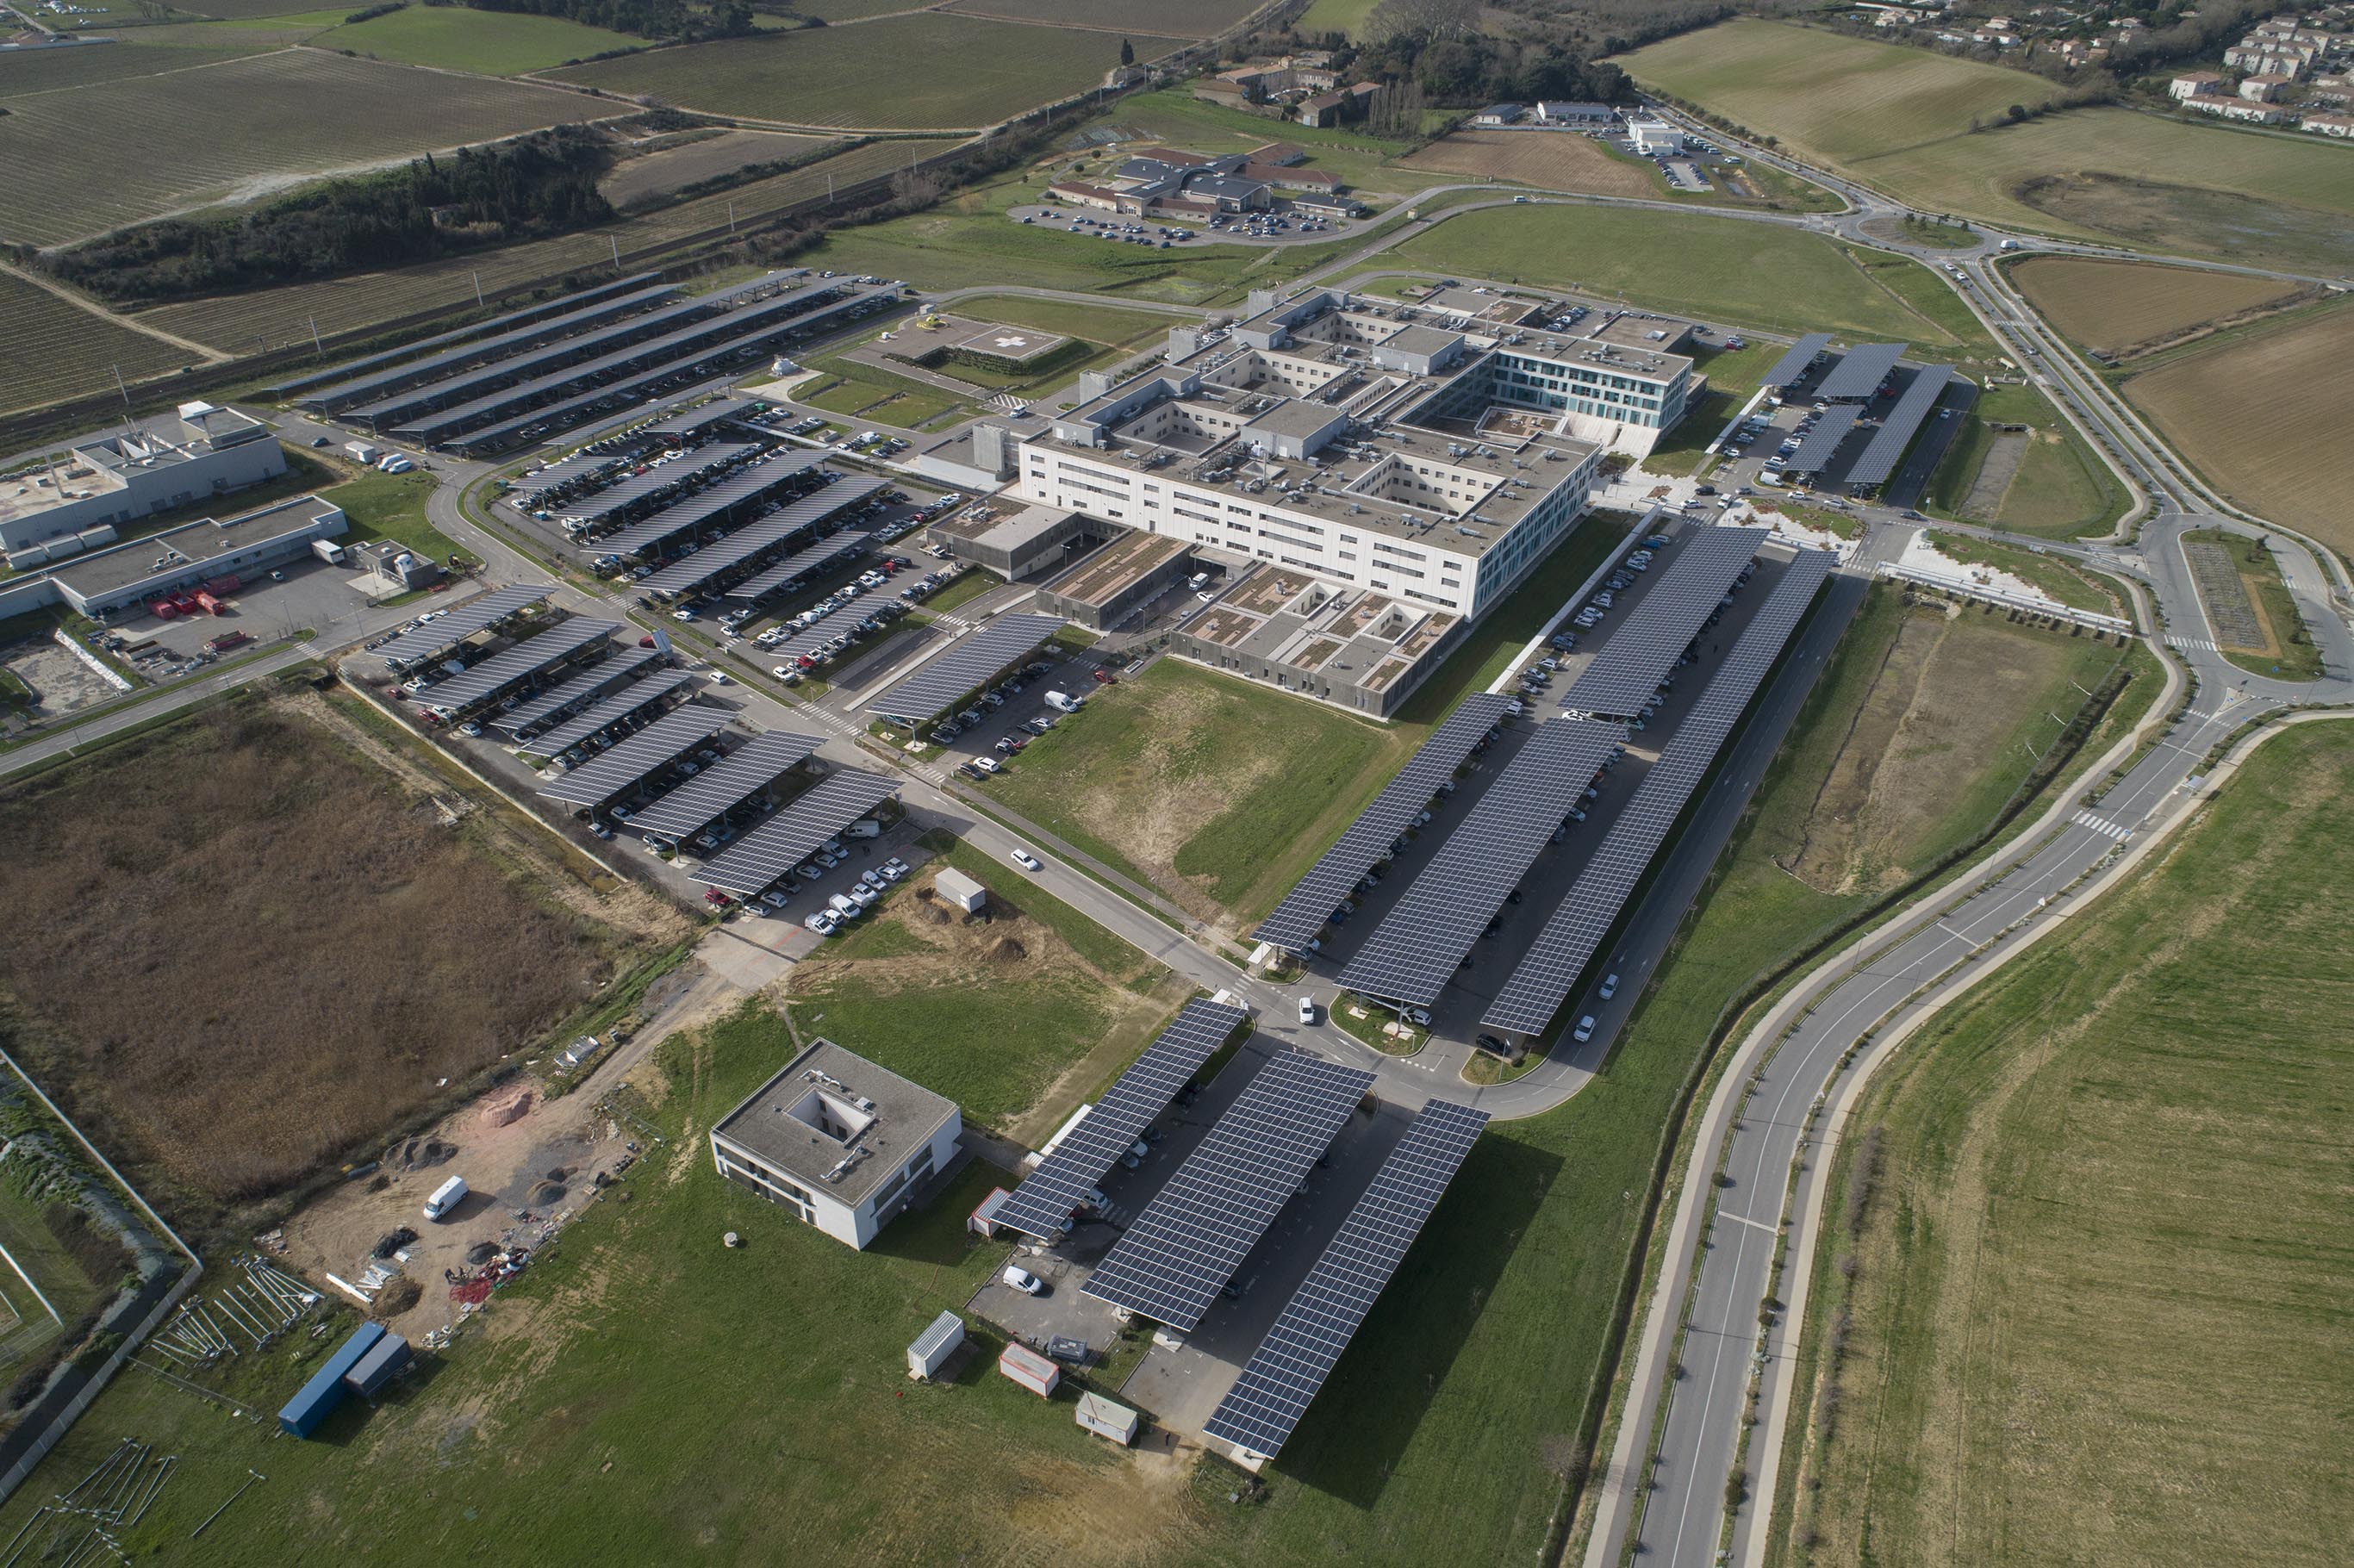 Carcassonne Hospital close to achieving energy self-sufficiency